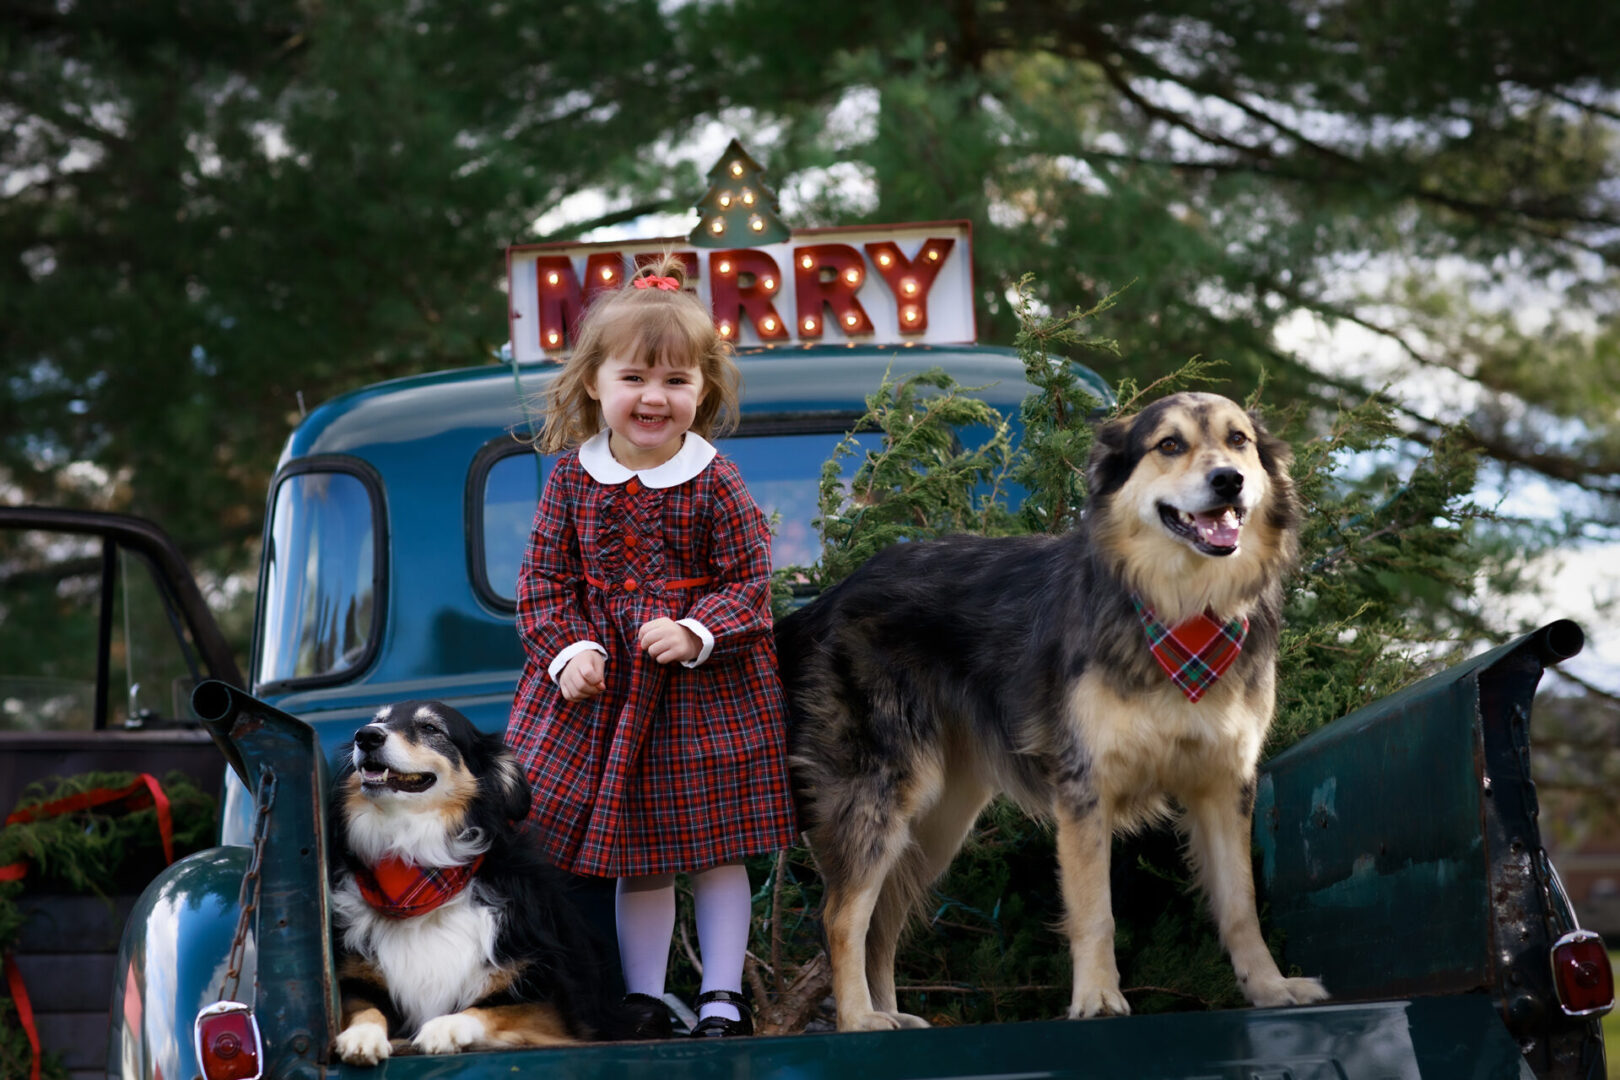 Be Merry Holiday with little girl and her dogs Leesburg